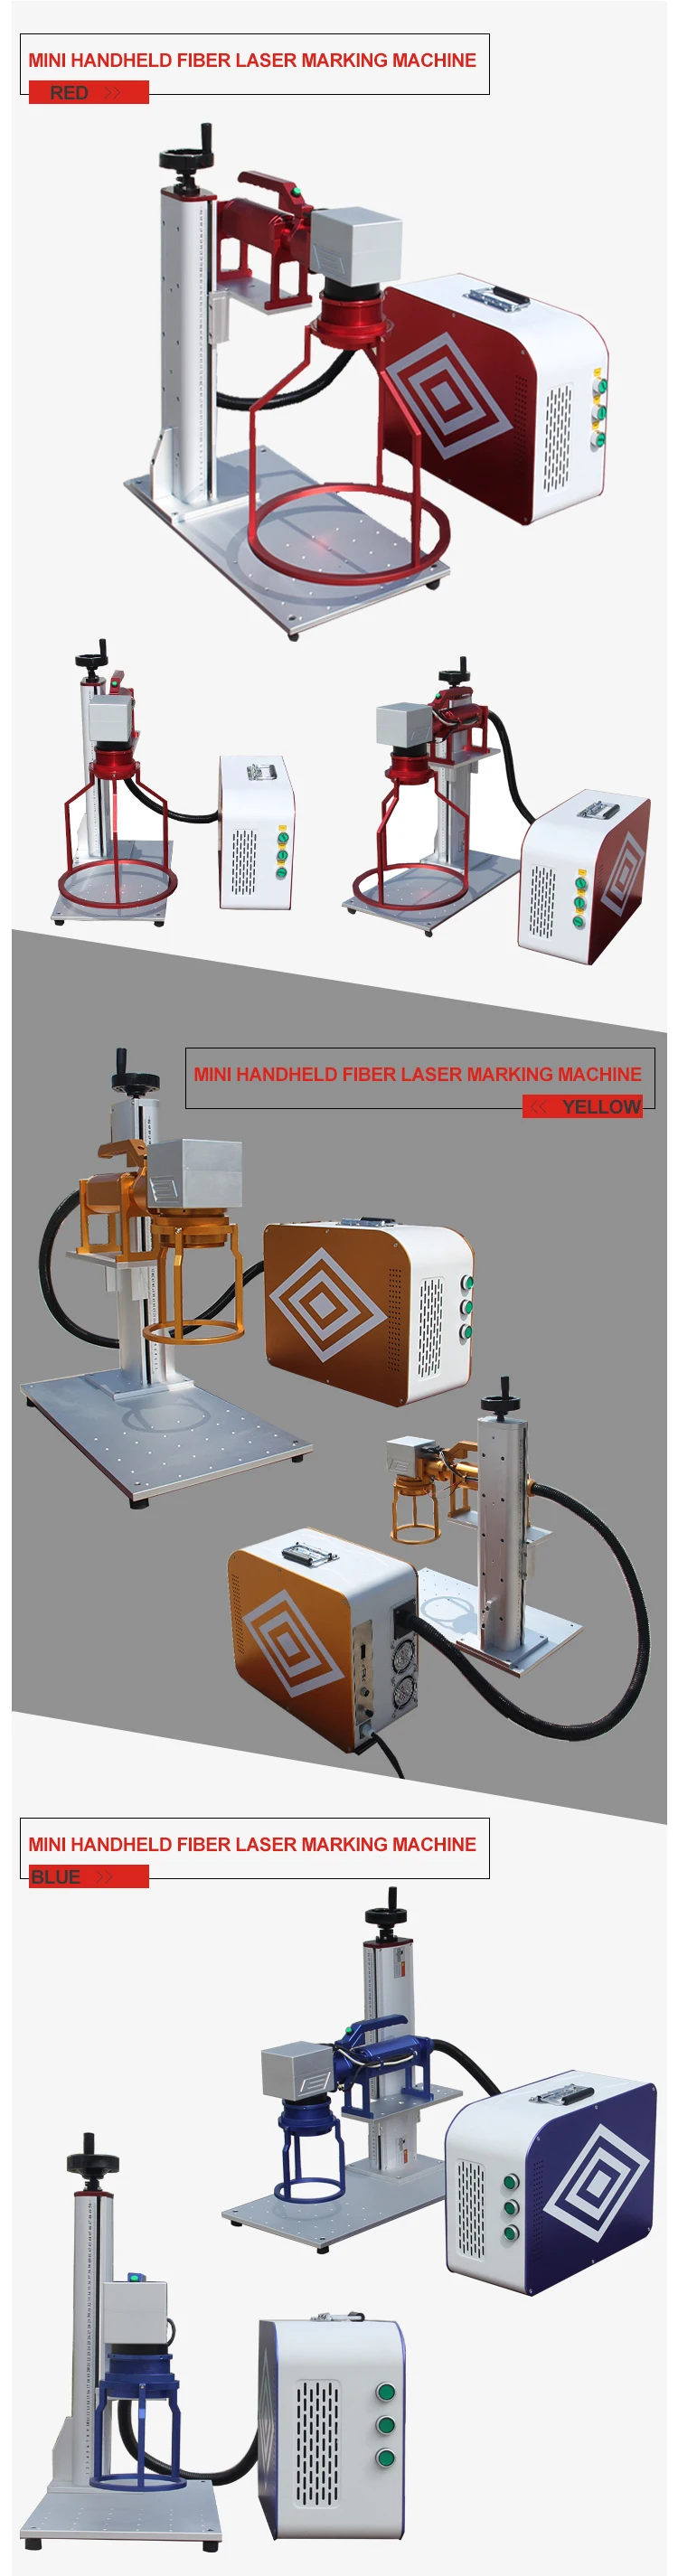 30W mini fiber laser marking machine from Chine factory engraving lasers